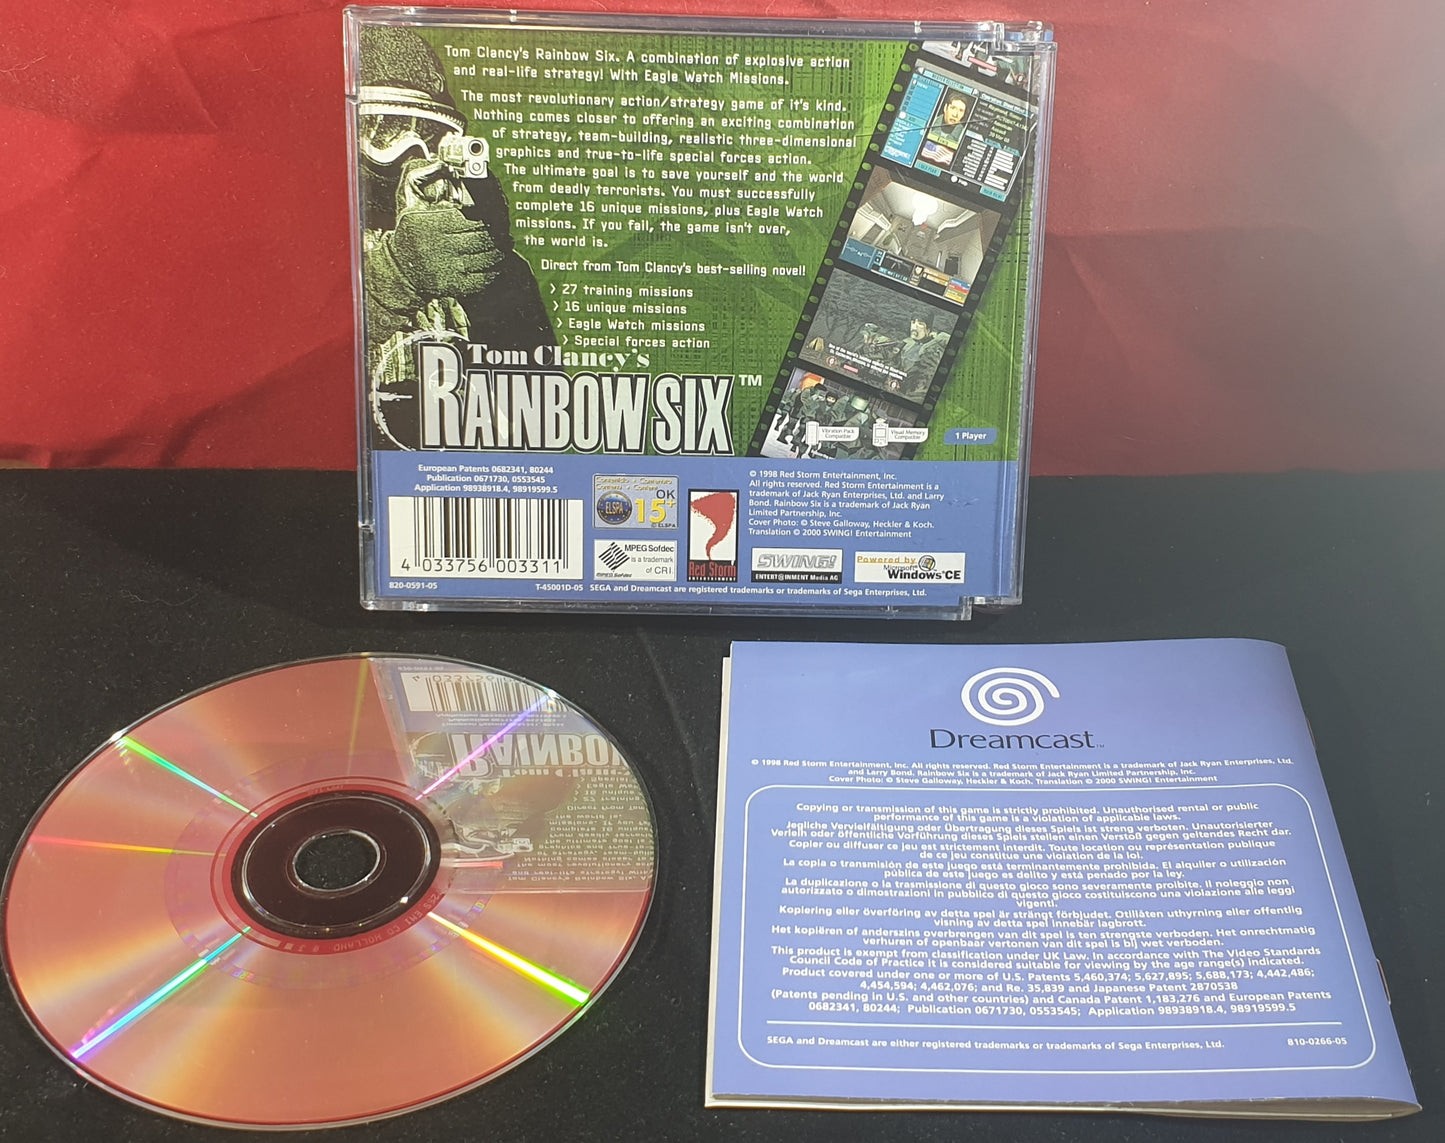 Tom Clancy's Rainbow Six Incl Eagle Watch Missions Sega Dreamcast Game